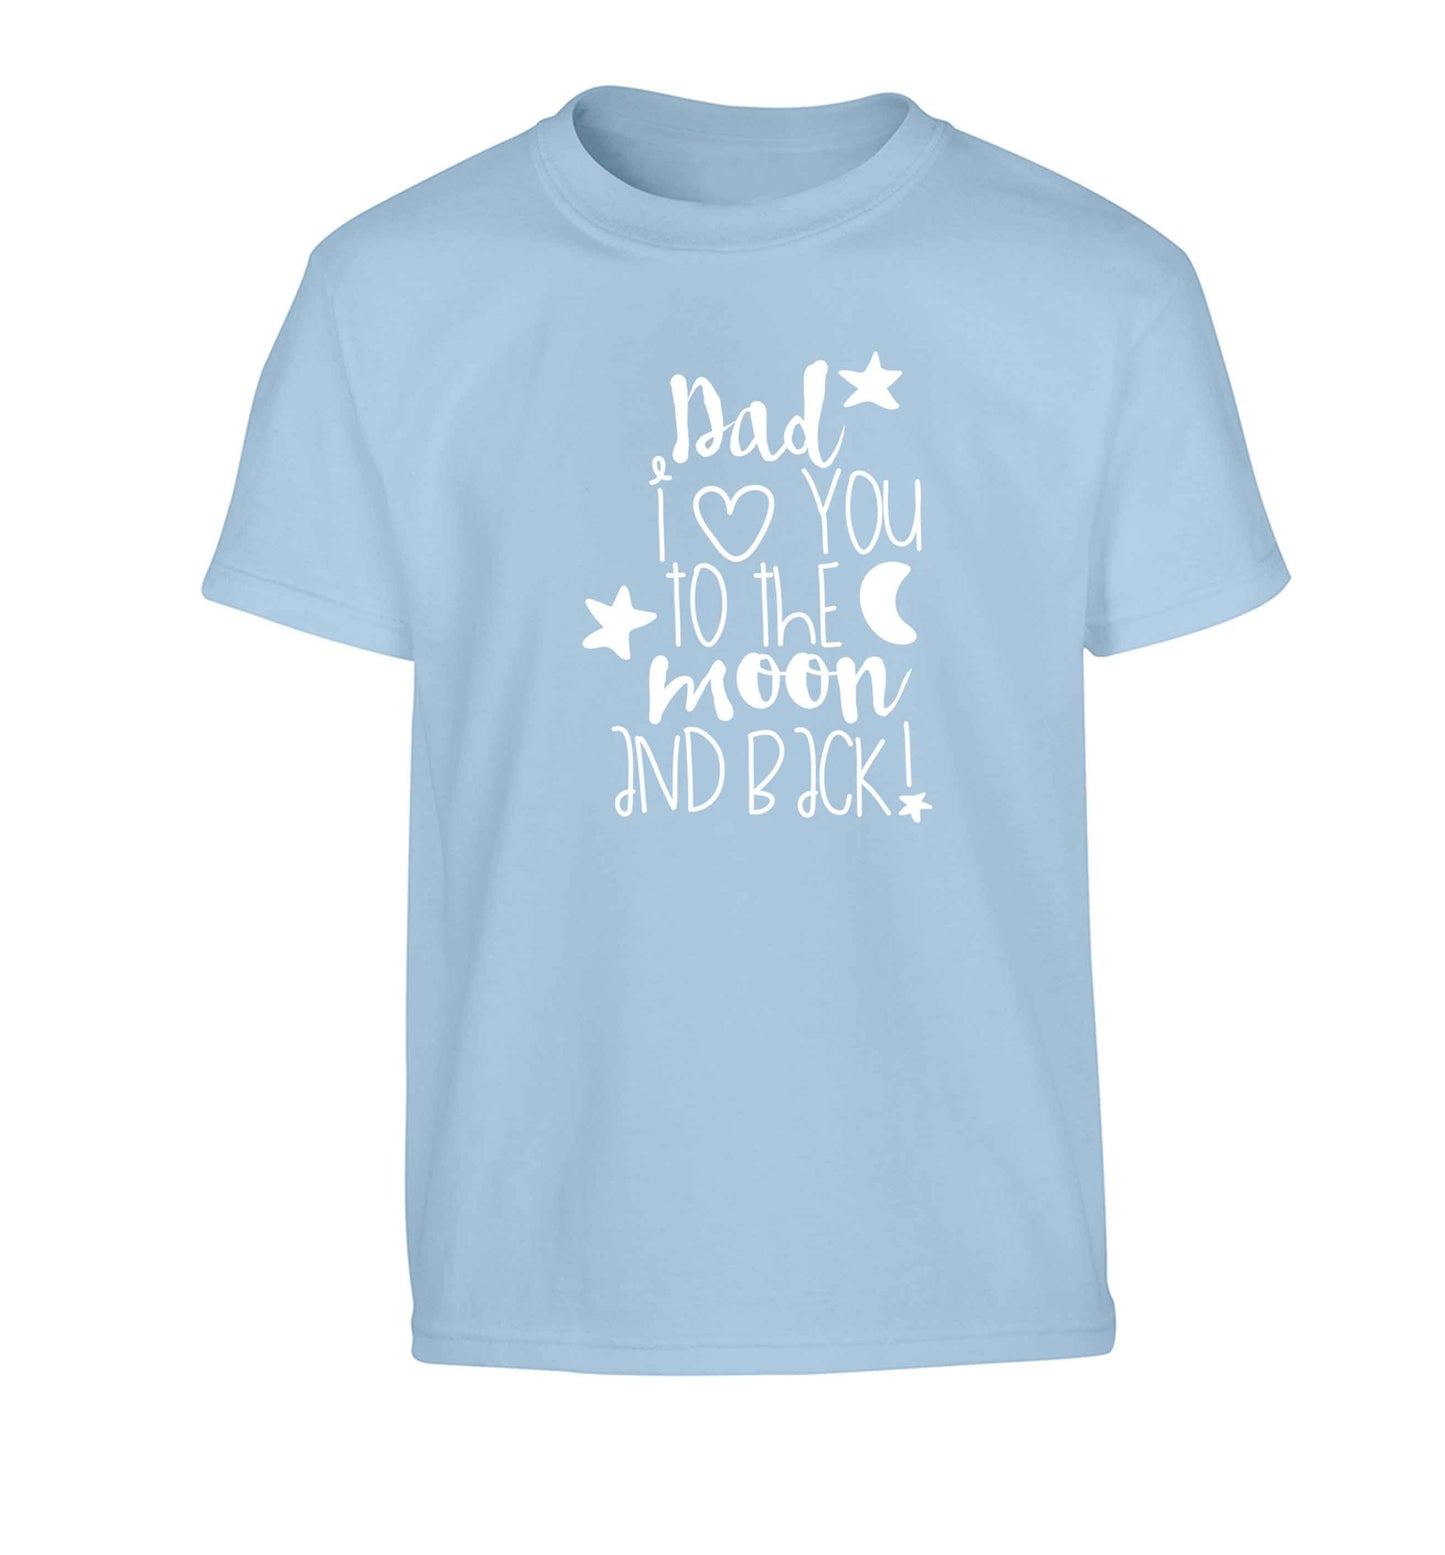 Dad I love you to the moon and back Children's light blue Tshirt 12-13 Years